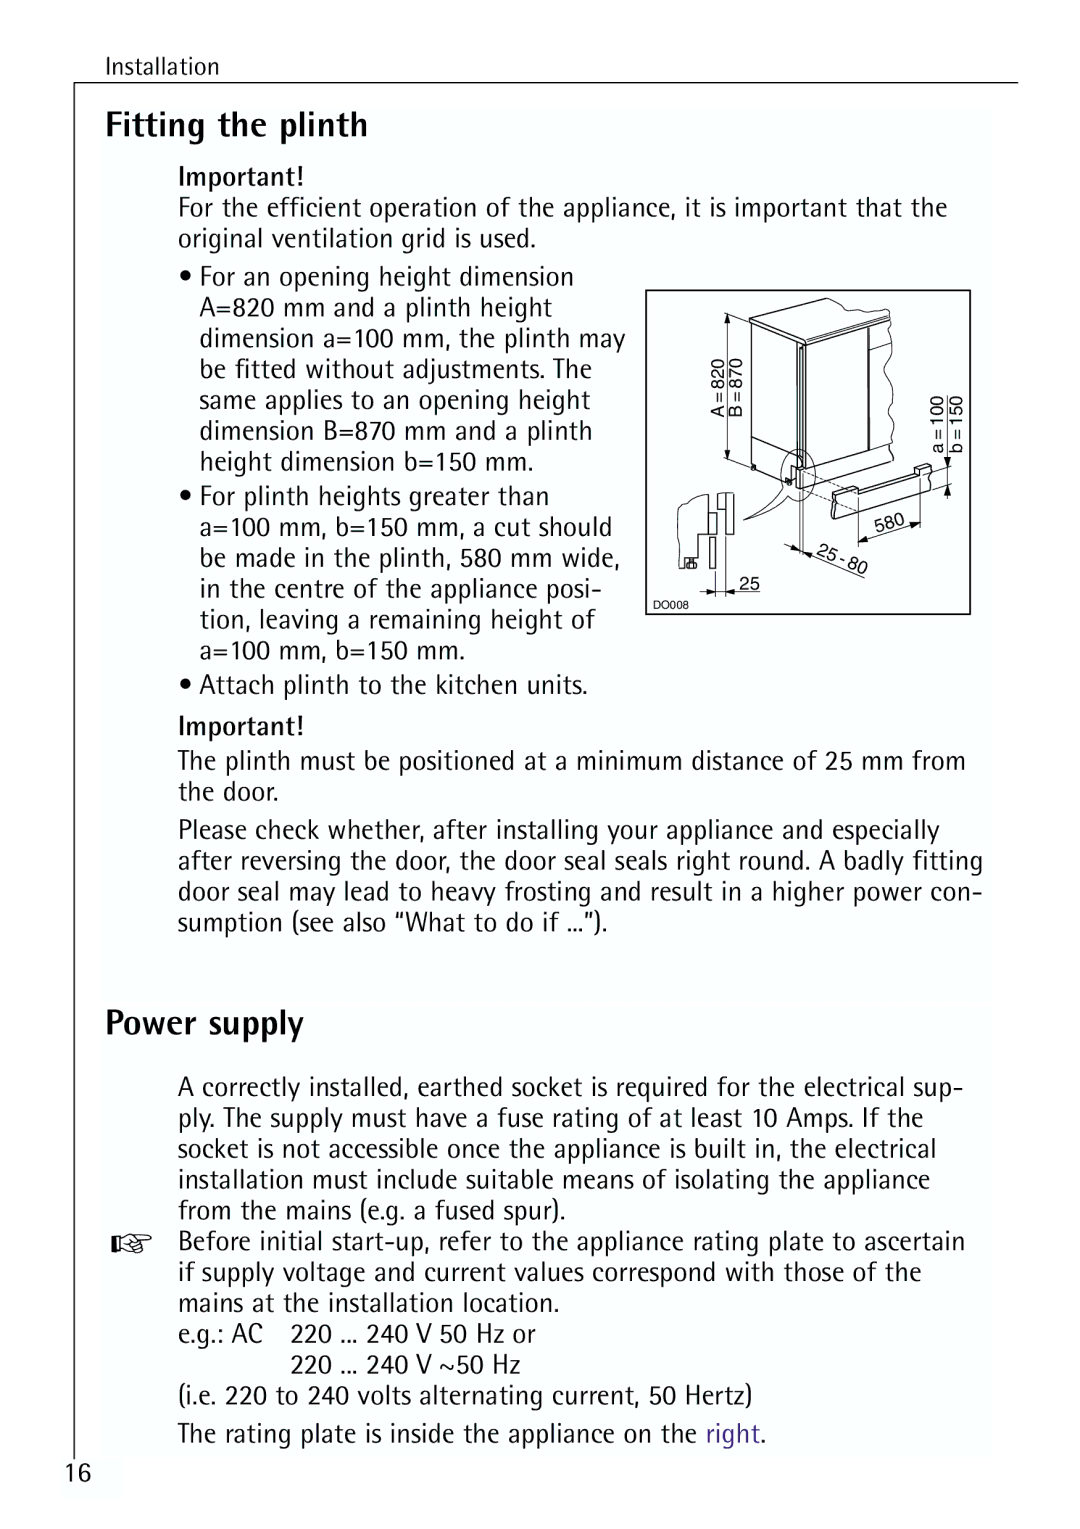 Electrolux U 96040-4 i installation instructions Fitting the plinth, Power supply 